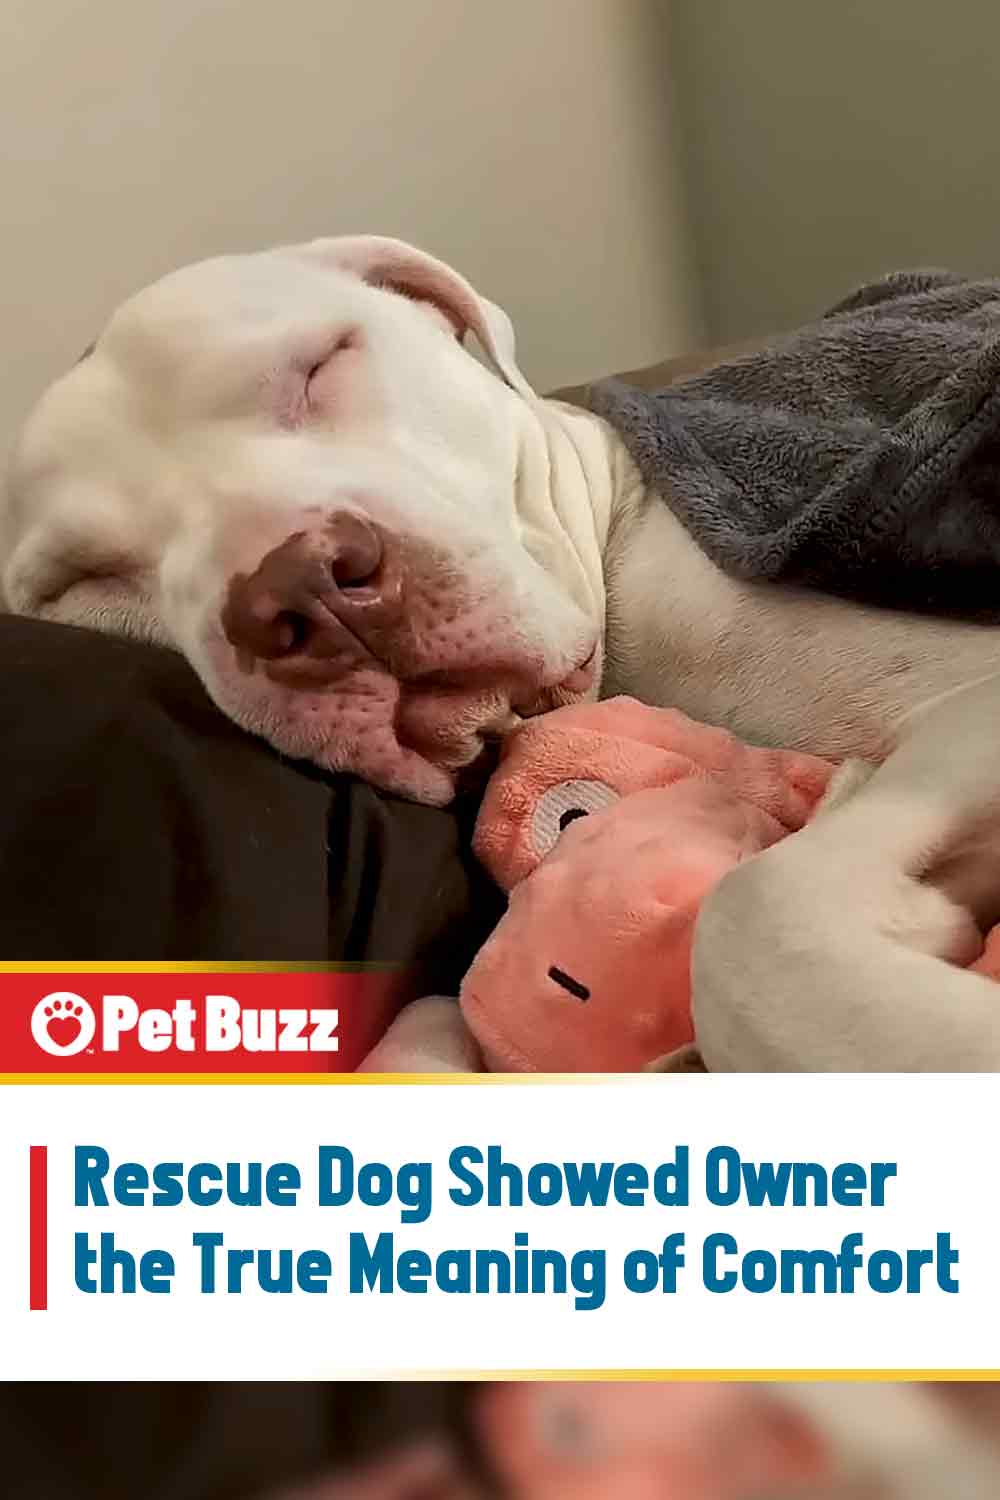 Rescue Dog Showed Owner the True Meaning of Comfort